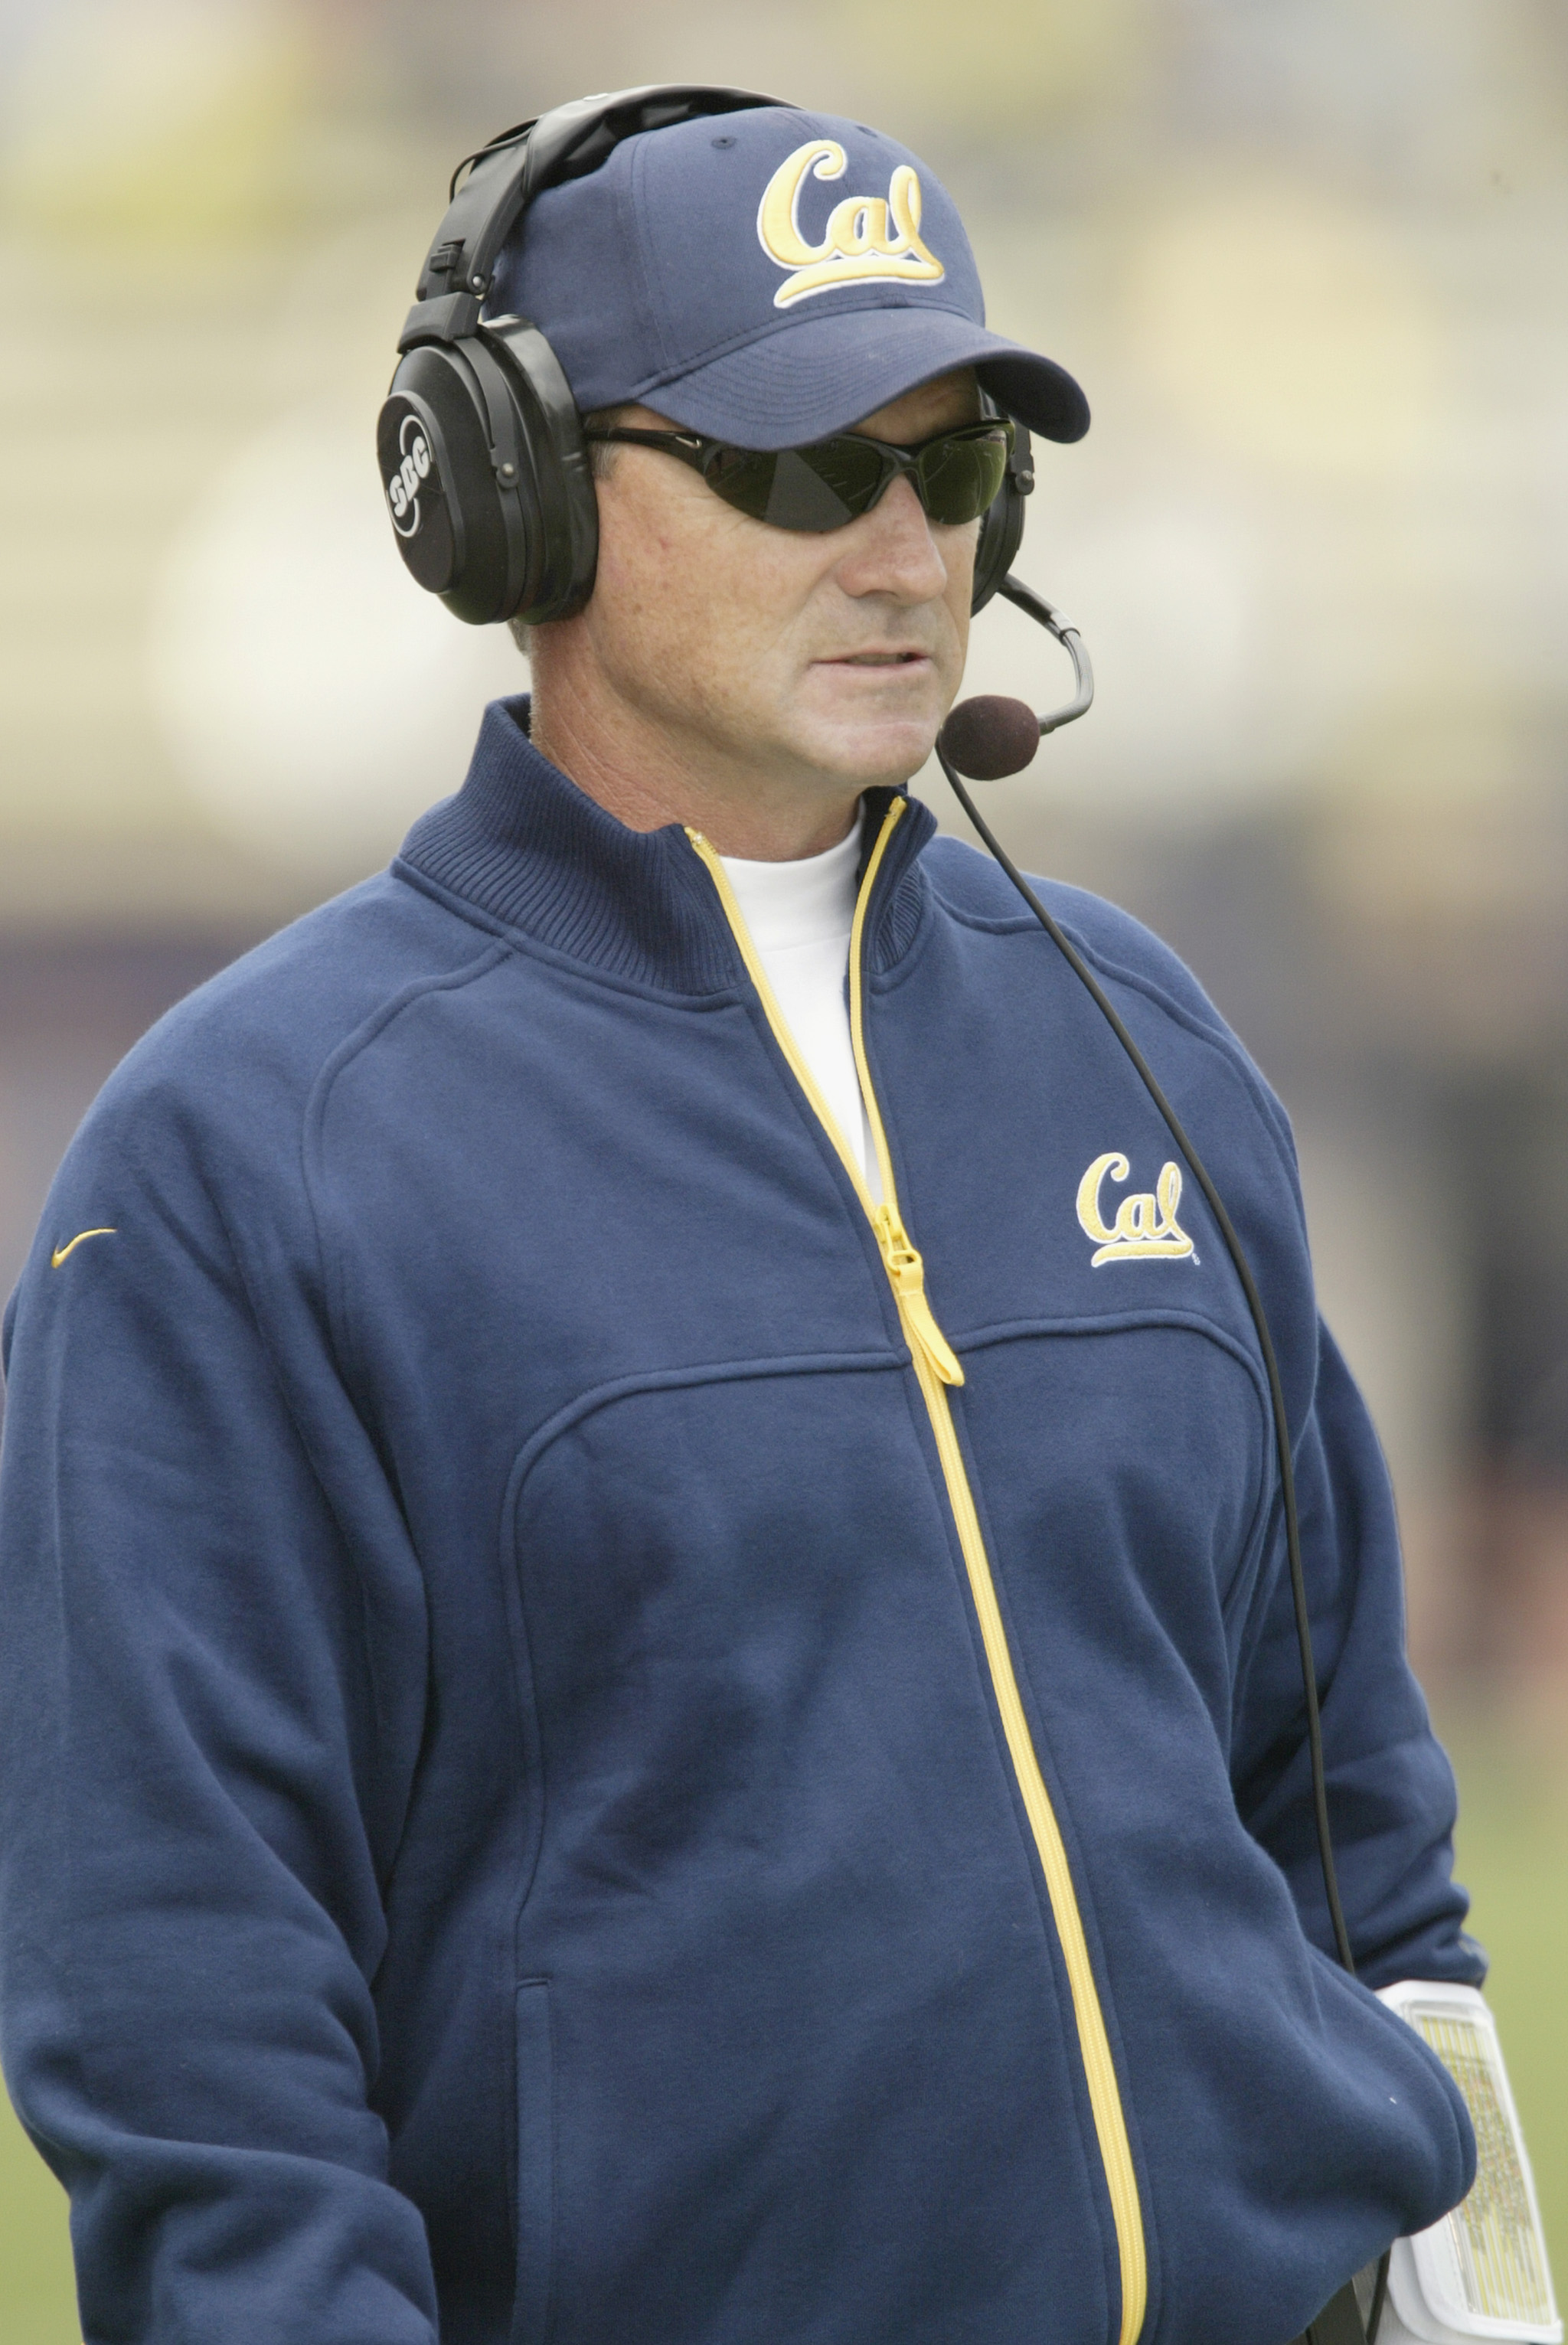 SEATTLE - SEPTEMBER 10:  Head coach Jeff Tedford of the University of California Golden Bears watches the game against the University of Washington Huskies on September 10, 2005 at Husky Stadium in Seattle Washington. The Golden Bears won 56-17. (Photo by